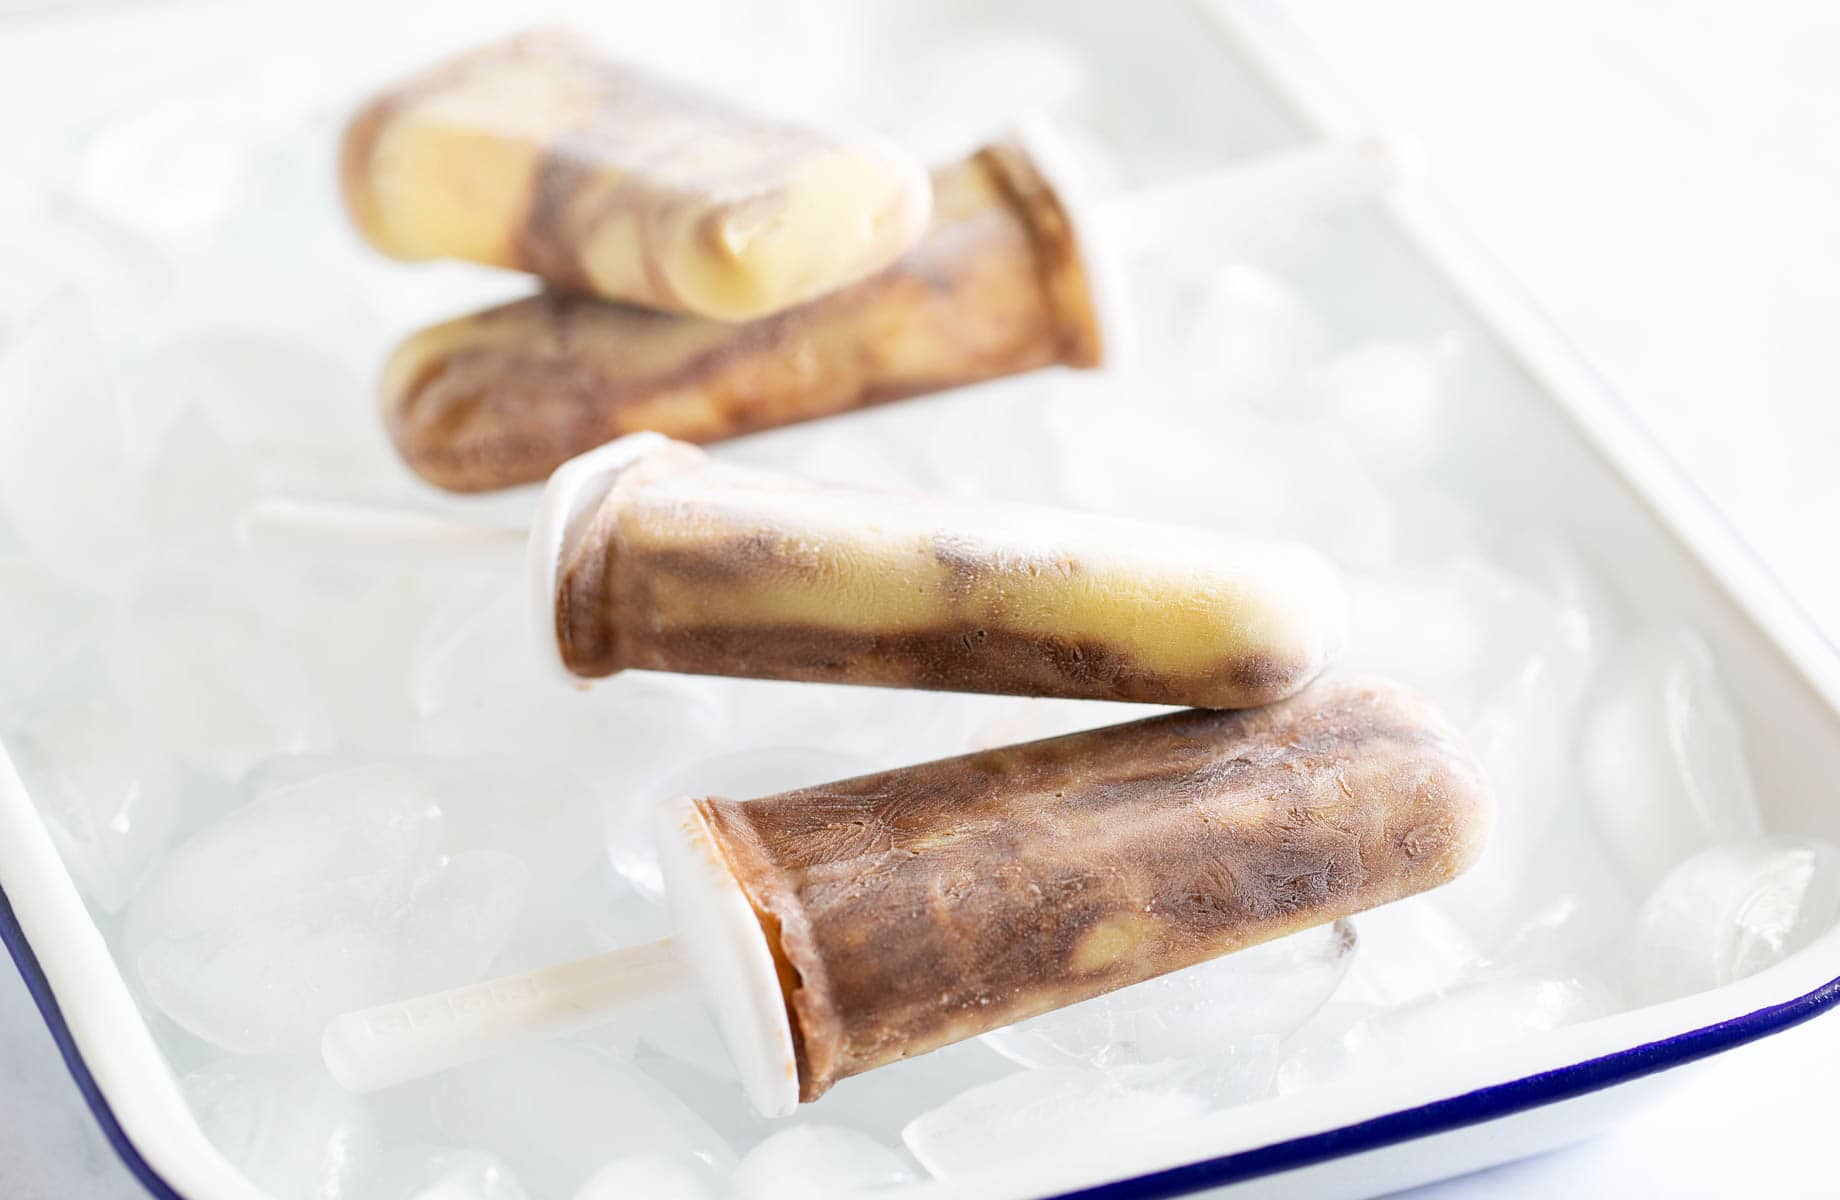 Four swirl-patterned popsicles rest on a tray filled with ice cubes.